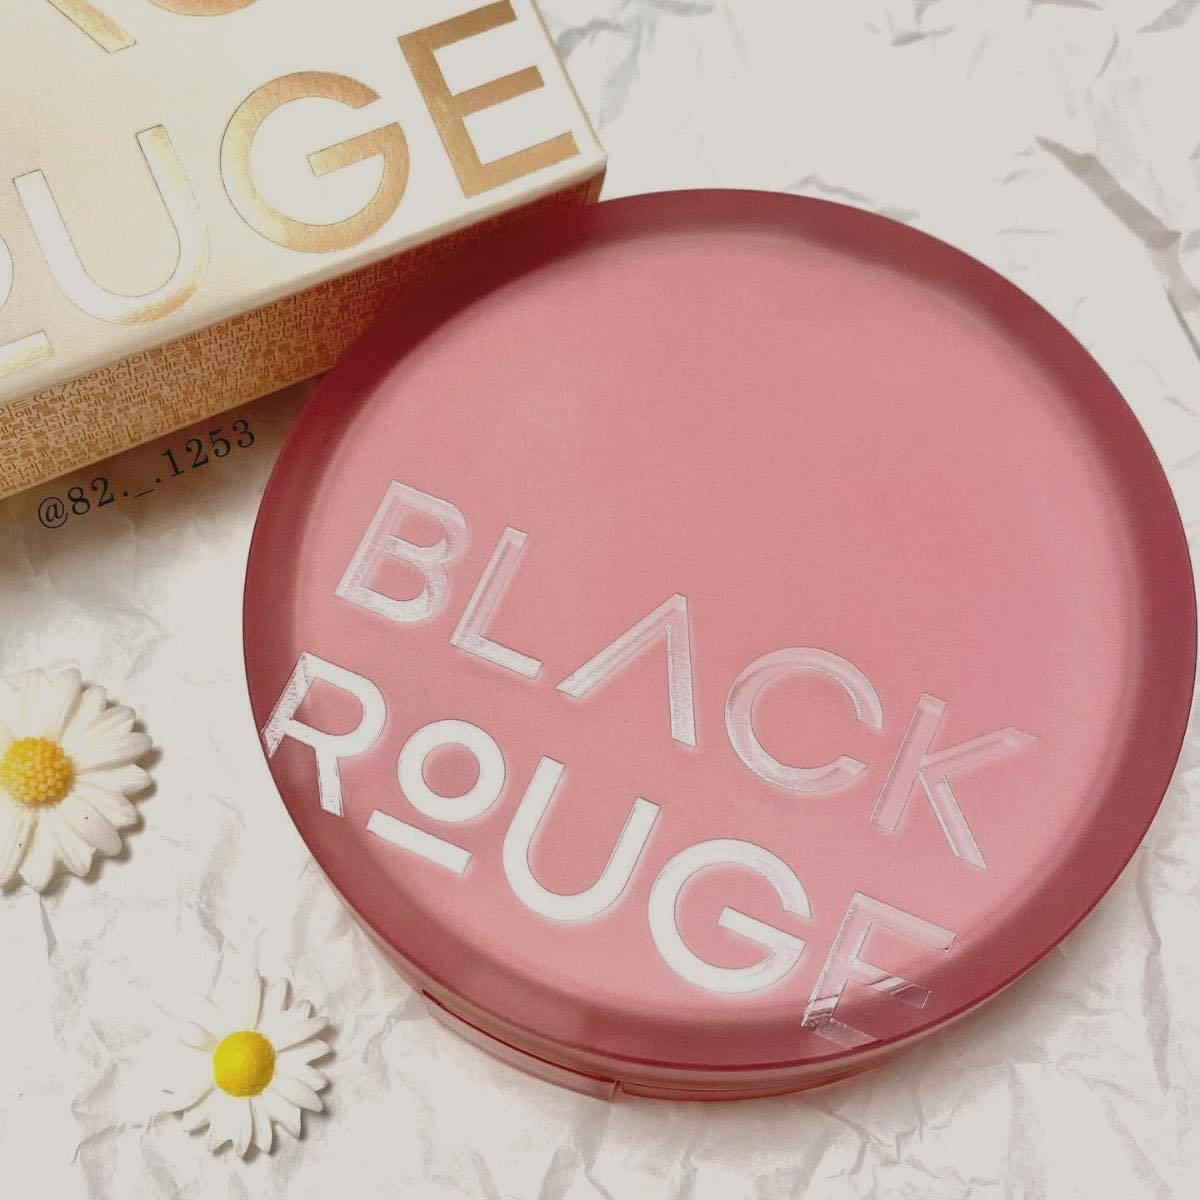 [Review] Black Rouge Thin Layer Velour Cushion 30